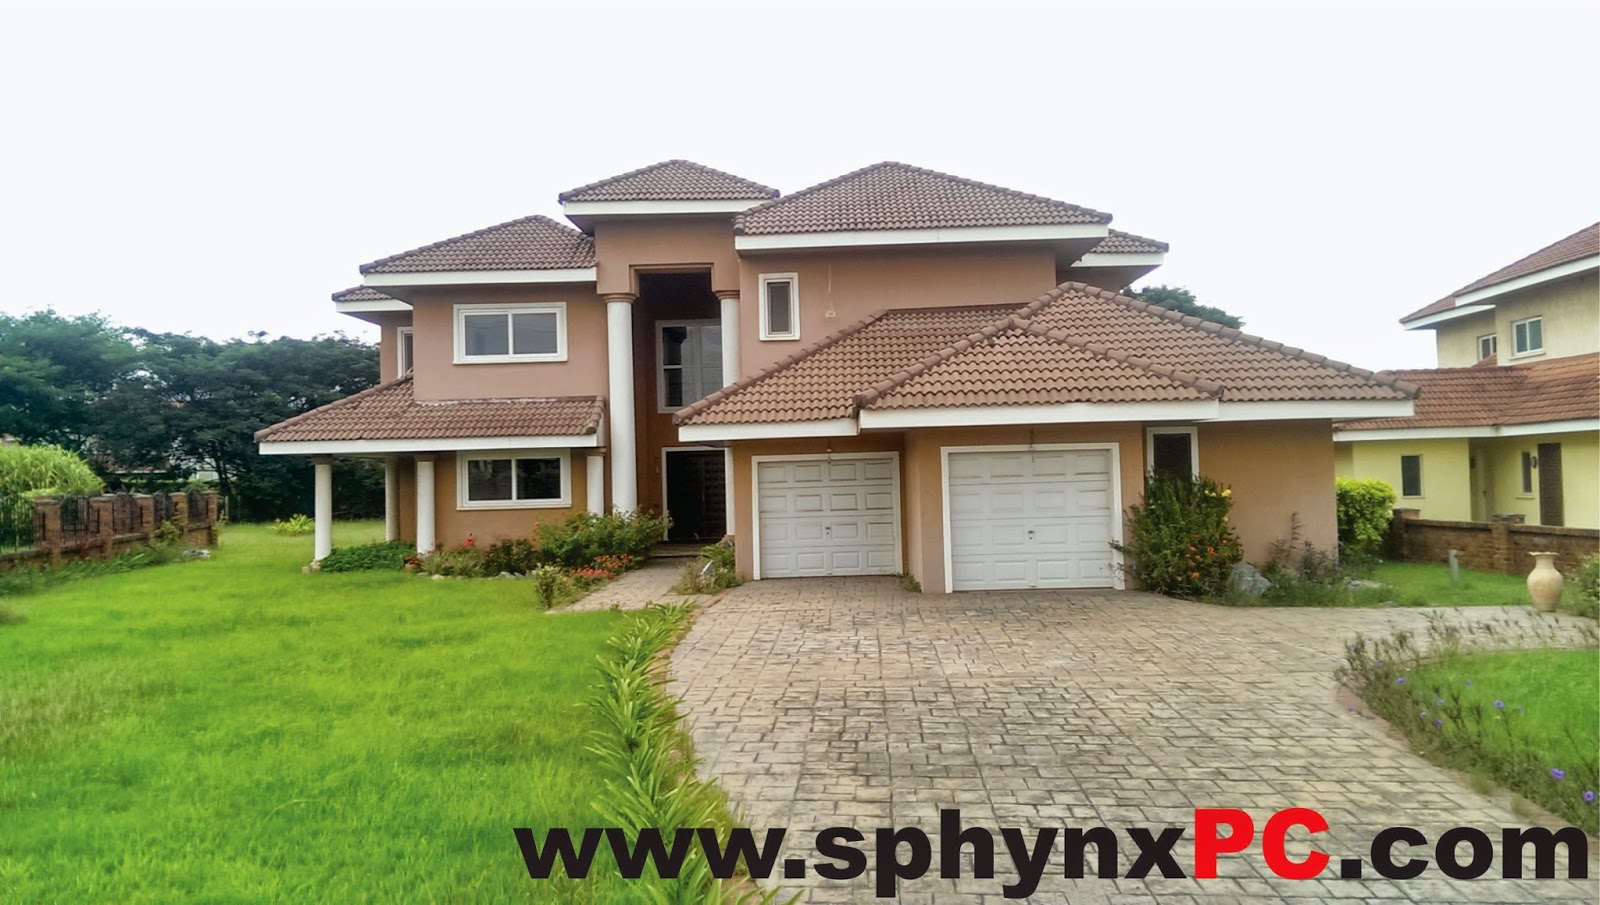 SPHYNX House For Sale, Trasacco Valley, Accra Ghana